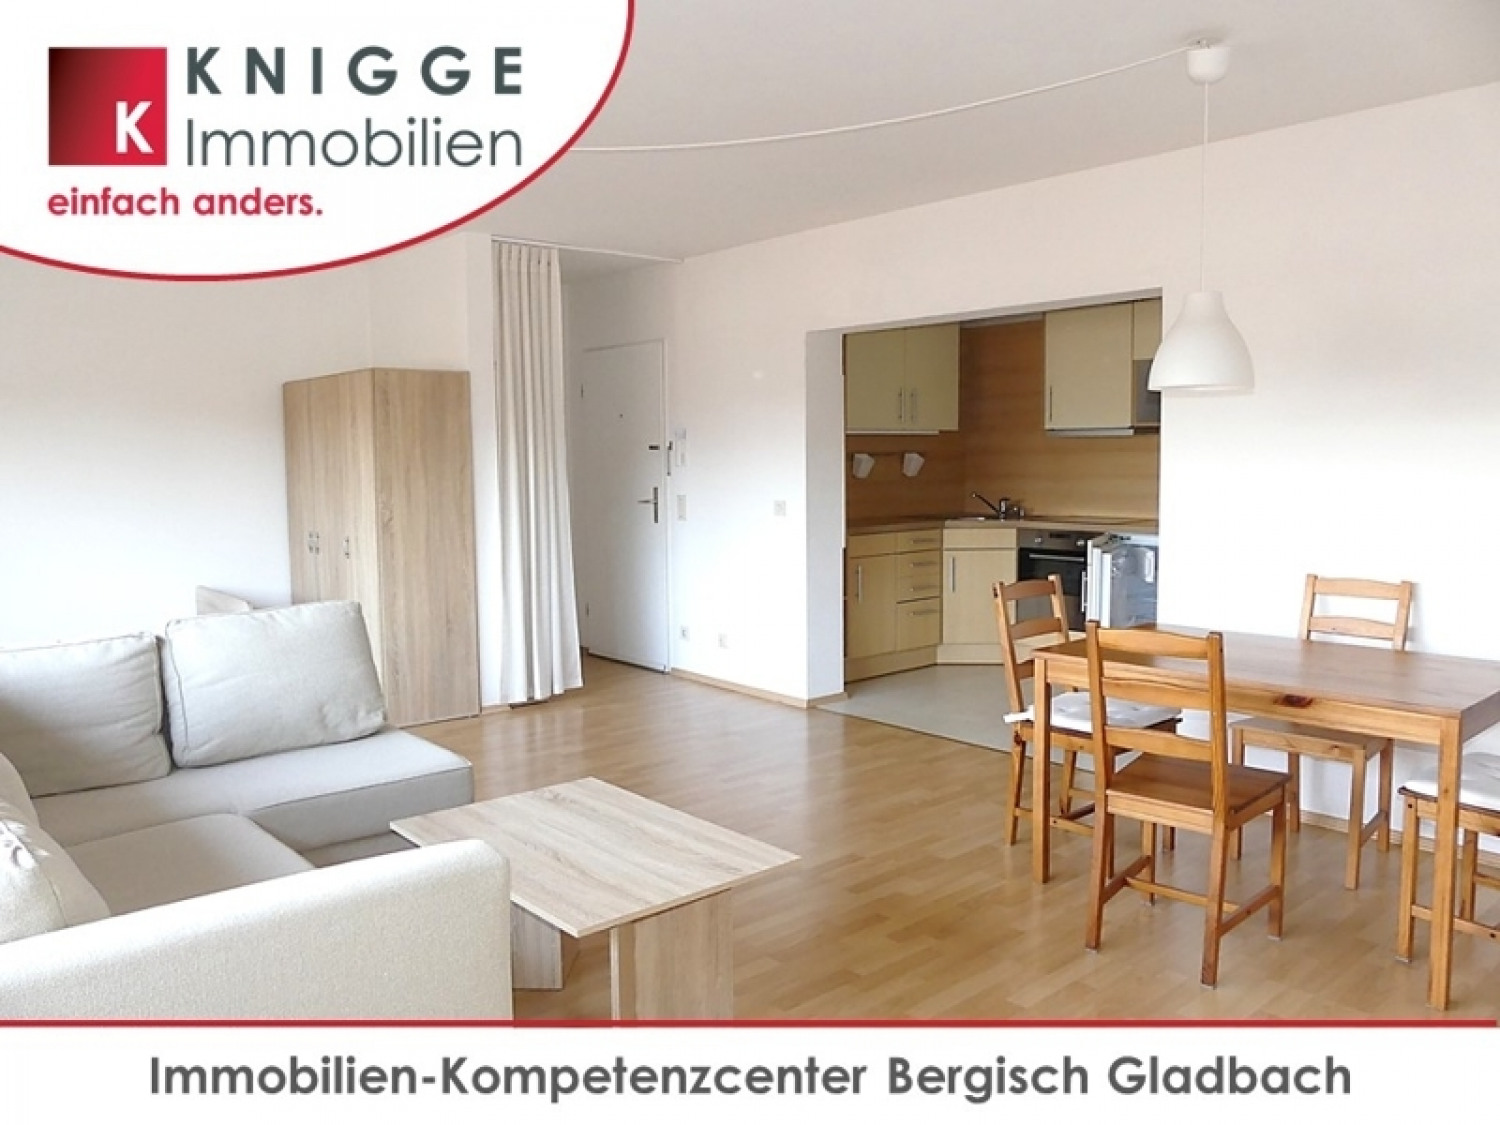 KNIGGE.Immobilien